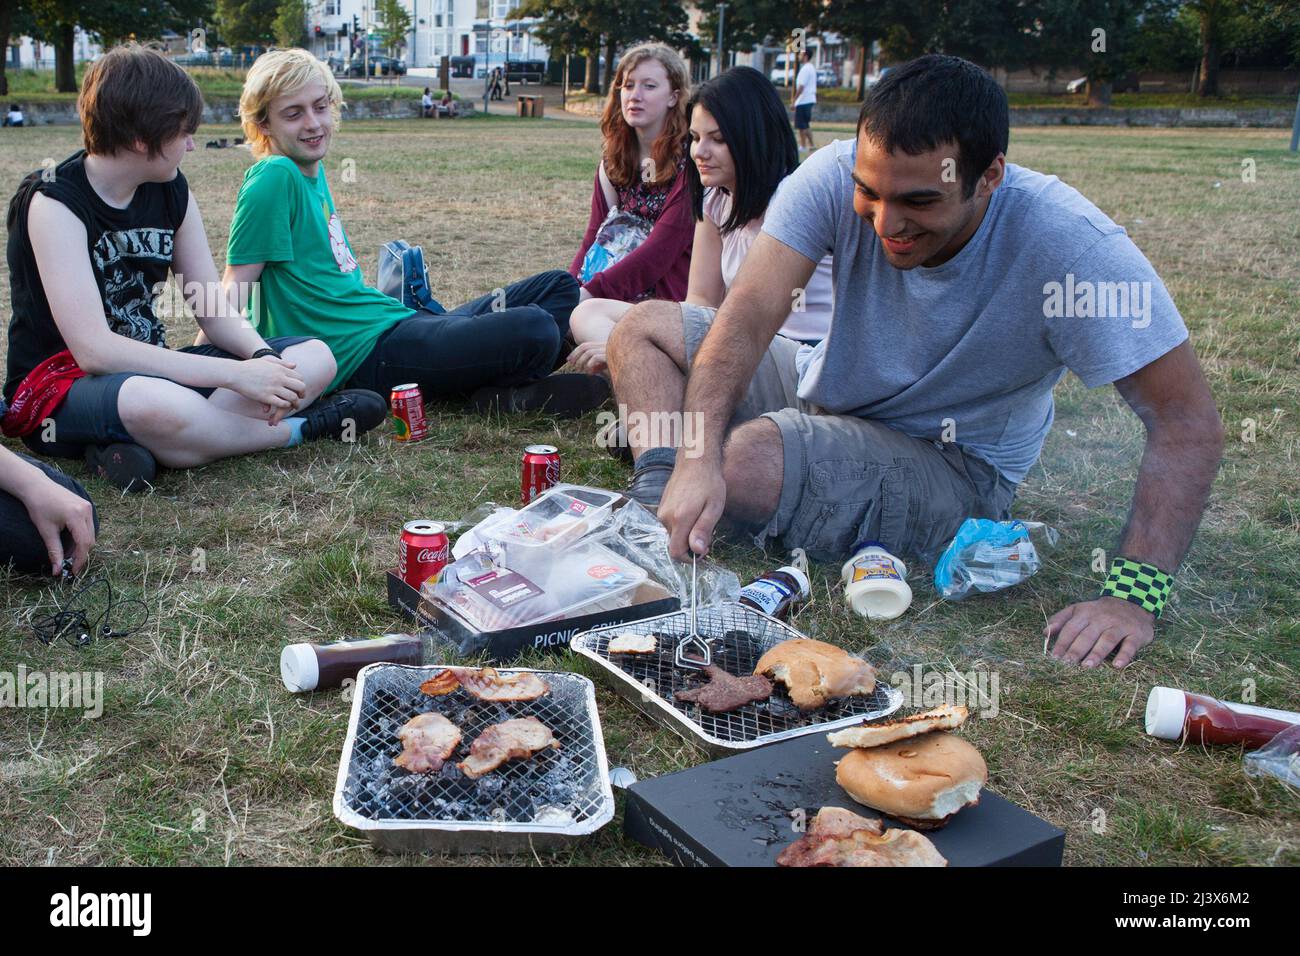 A man cooking food on a disposable barbeque in a park in Brighton Stock Photo